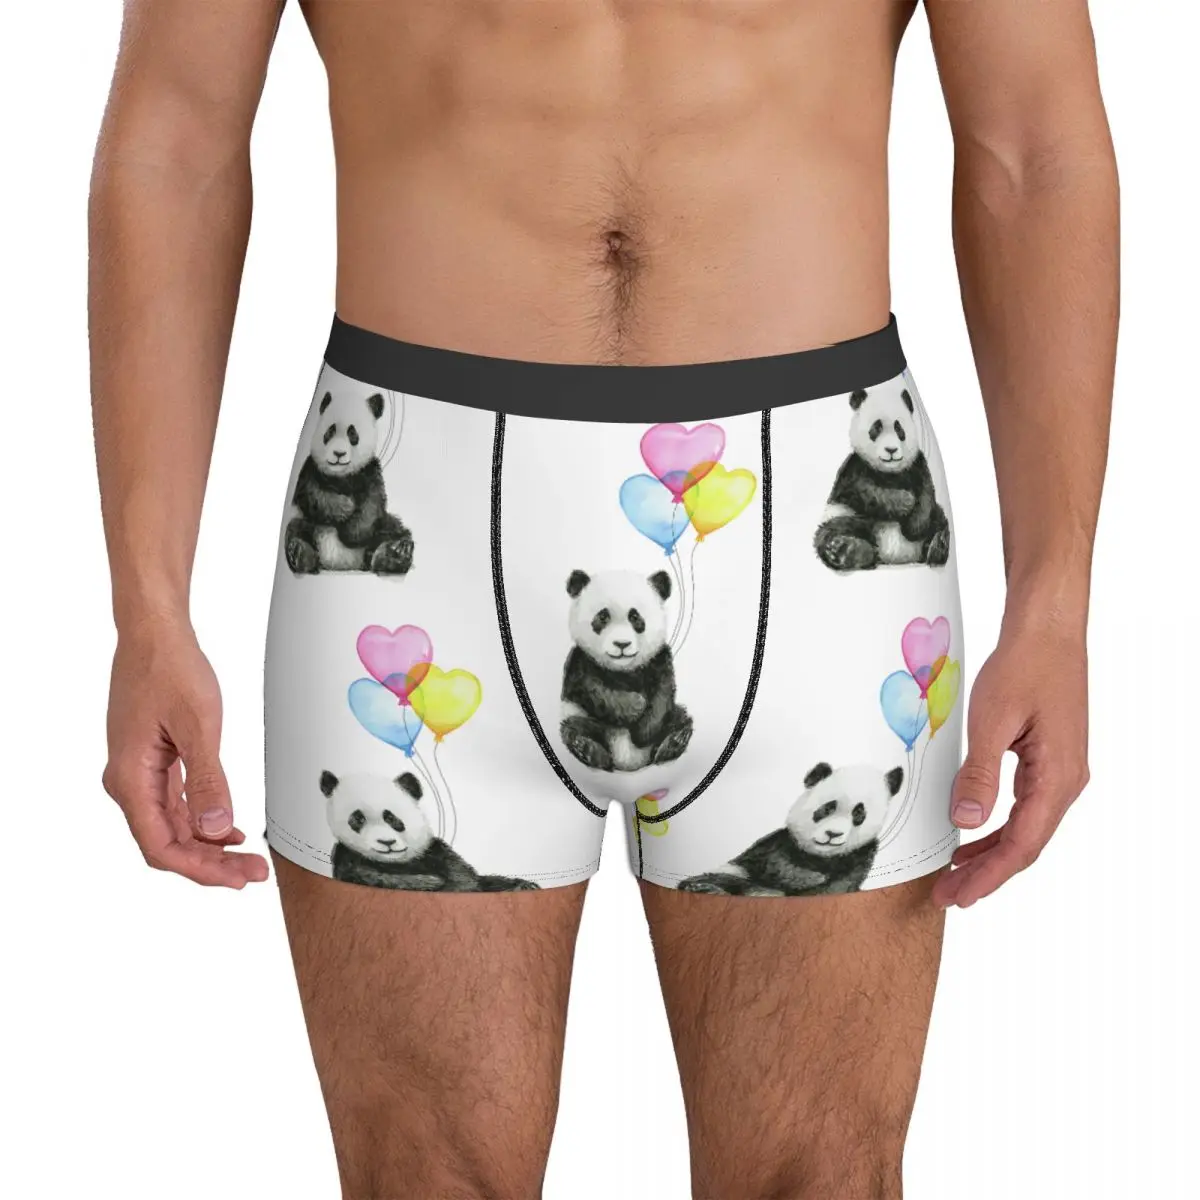 

Baby Panda Underwear Heart Shaped Balloons Pouch Trenky Trunk Sublimation Boxer Brief Soft Man Panties Plus Size 2XL